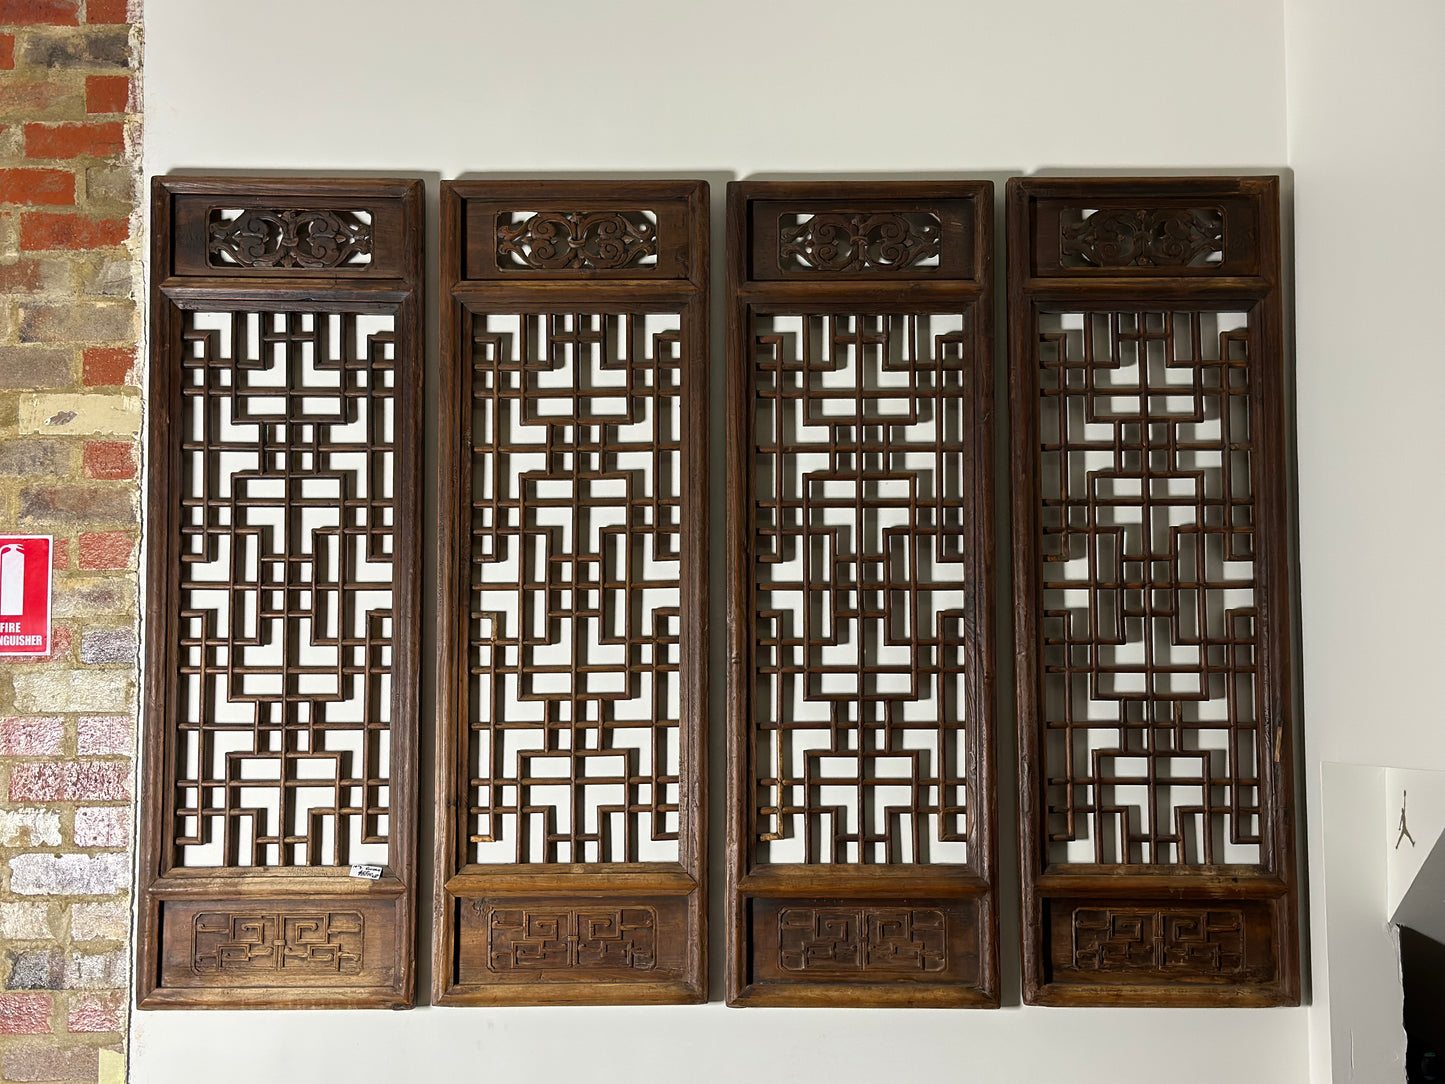 19th Century Antique Wooden Screens (Set of 4)